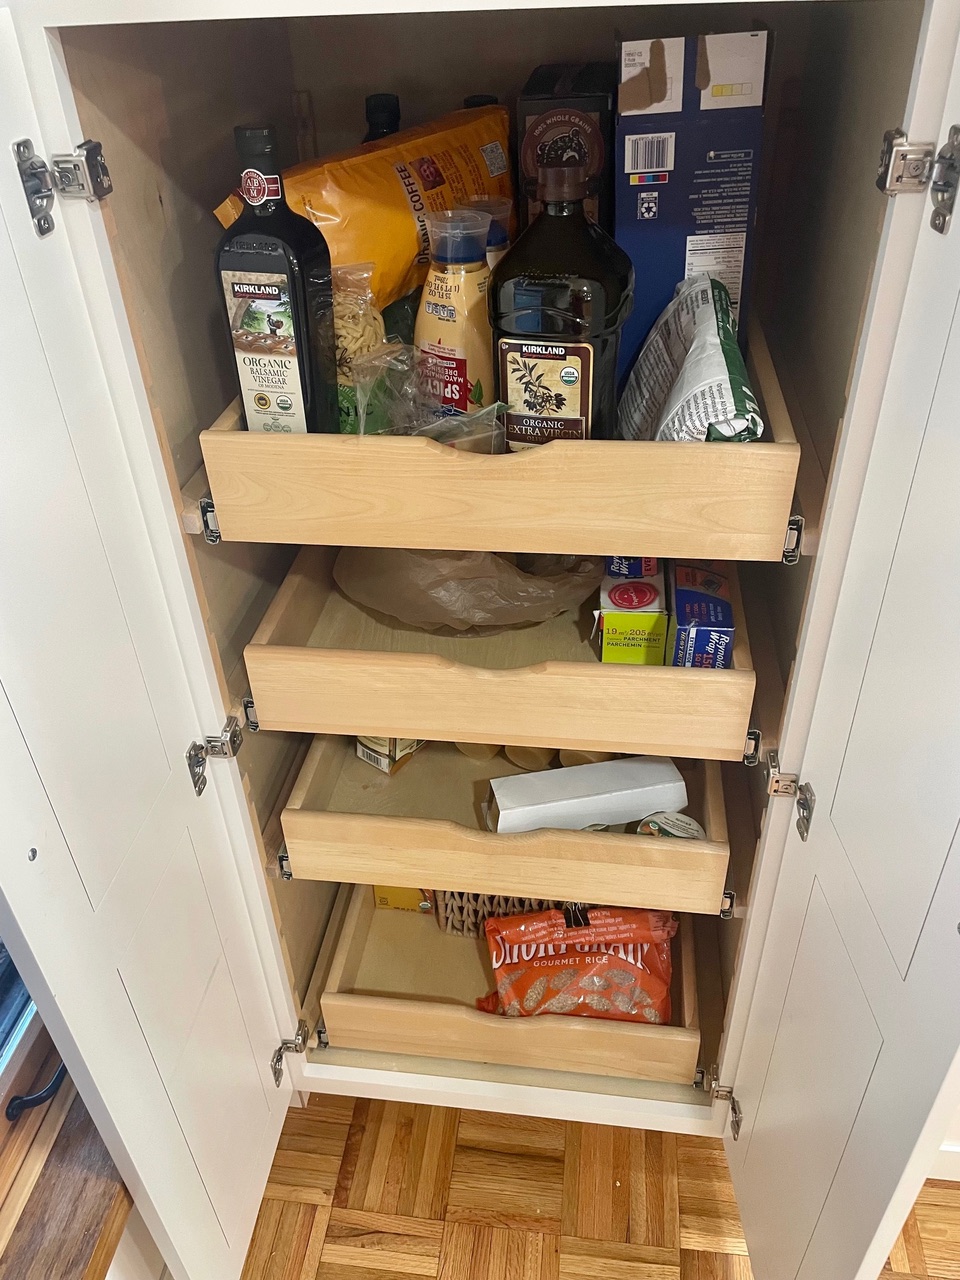  Cabinet Organization and Cleaning